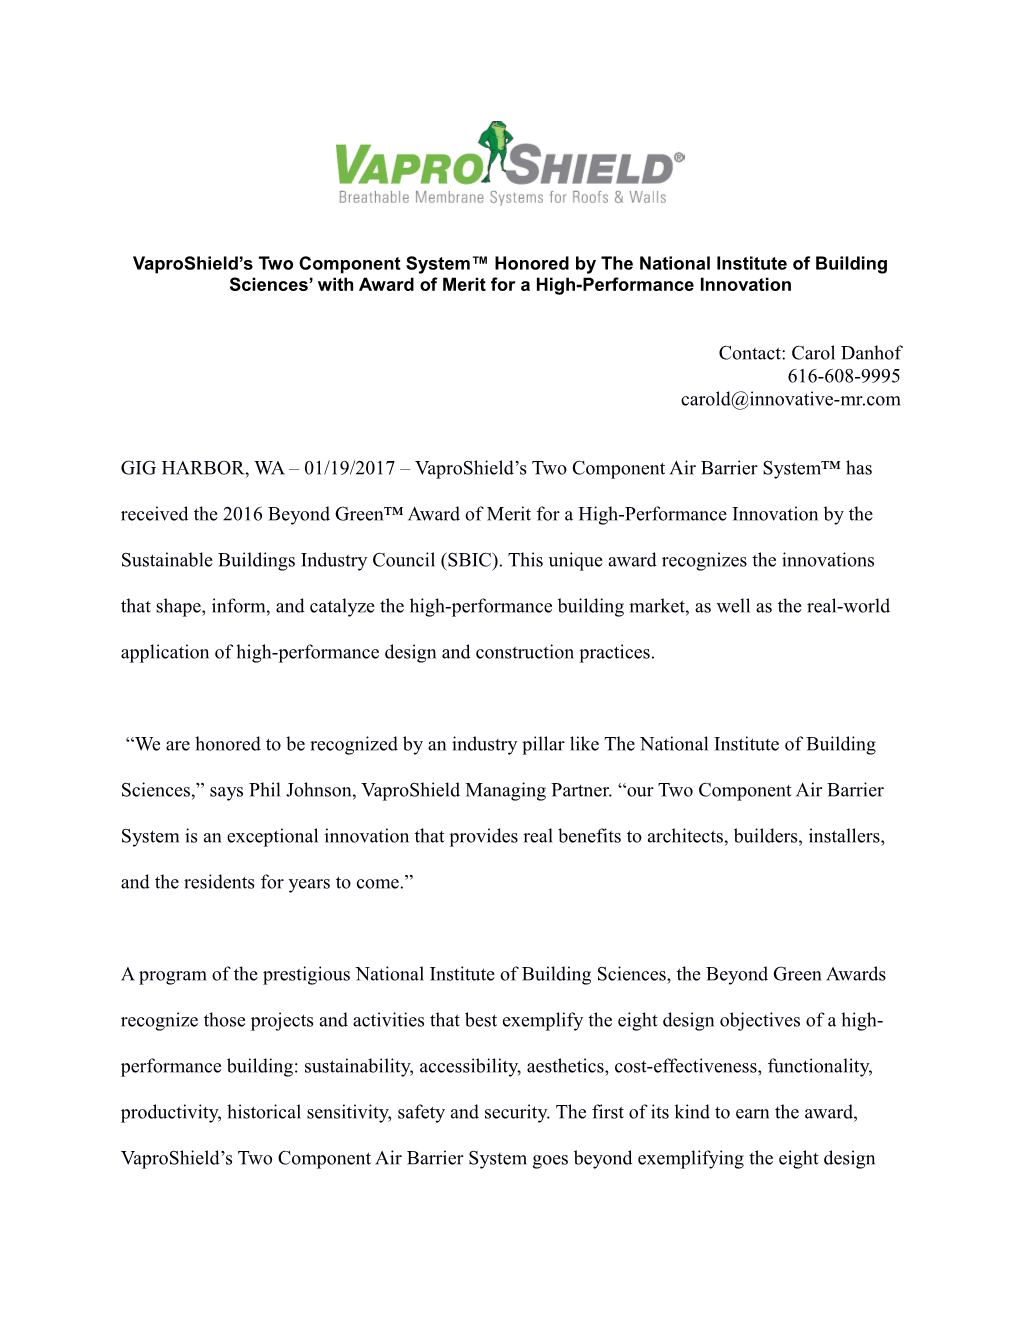 Vaproshield S Two Component System Honored by the National Institute of Building Sciences